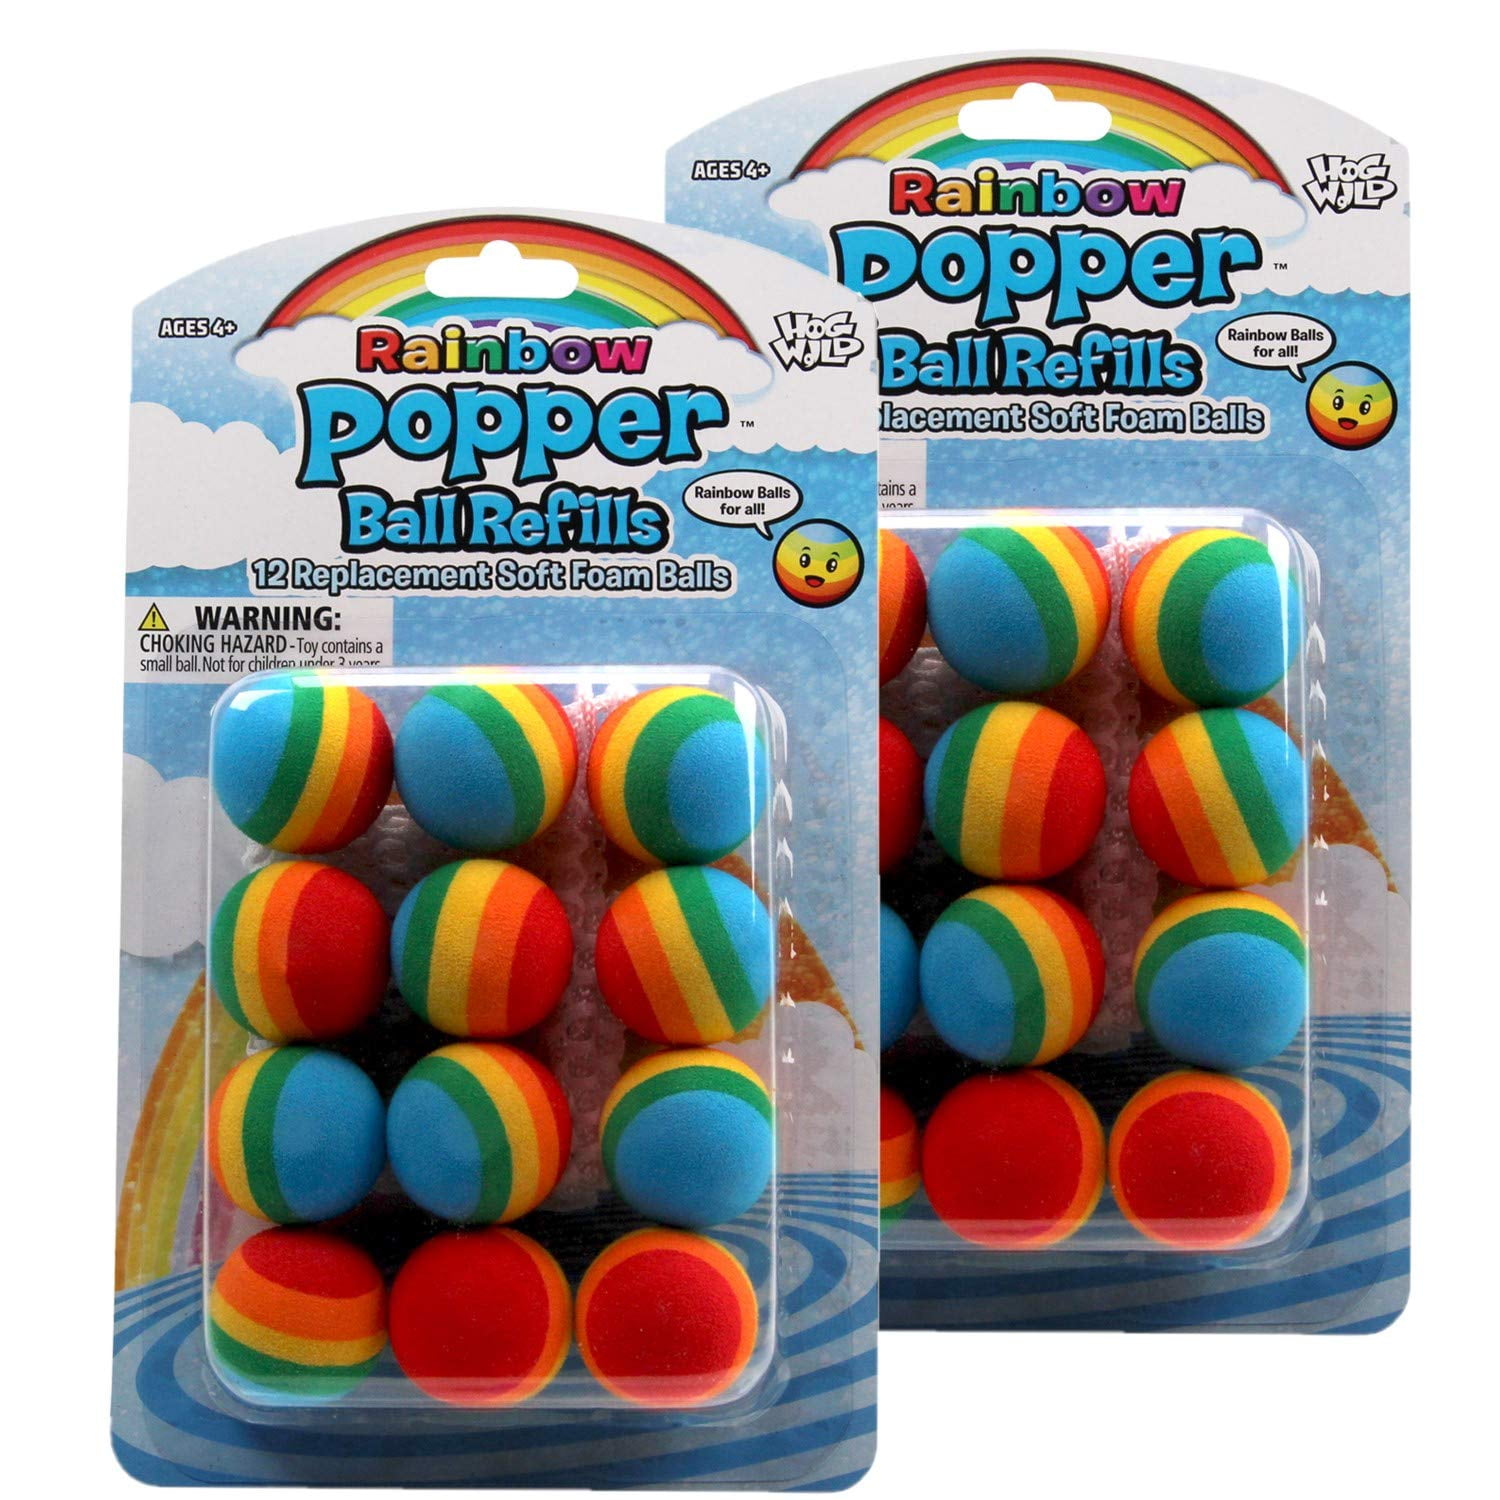 MARBLE COLOUR SUPER DOME POPPERS TOYS NOVELTY PARTY POPPER FLY ASSORTED 55mm 